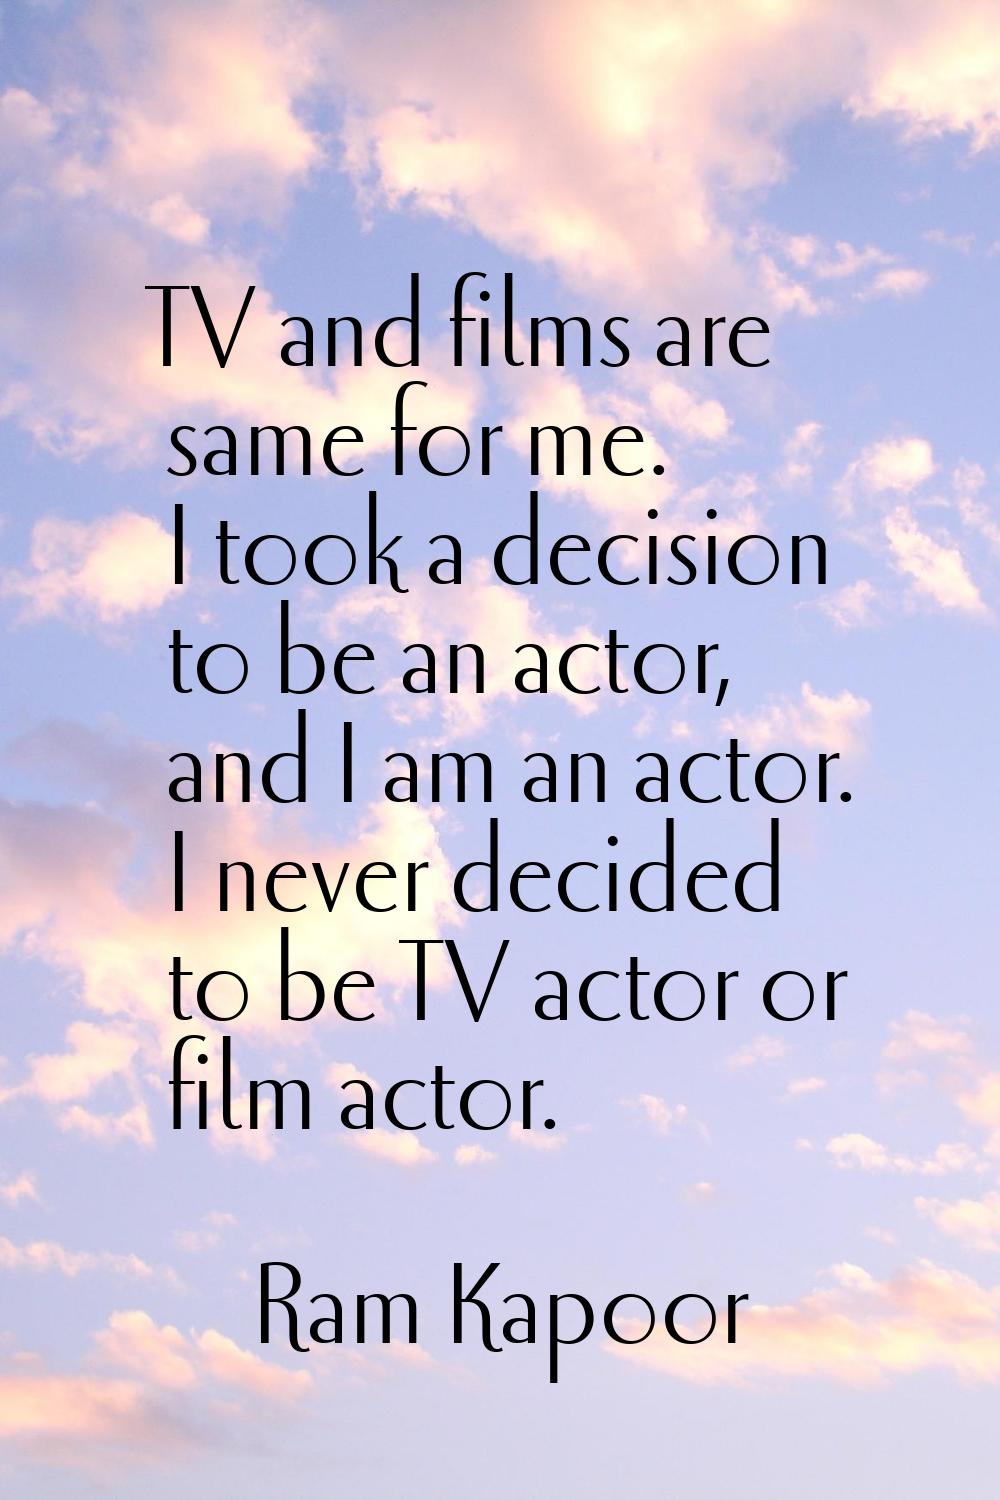 TV and films are same for me. I took a decision to be an actor, and I am an actor. I never decided 